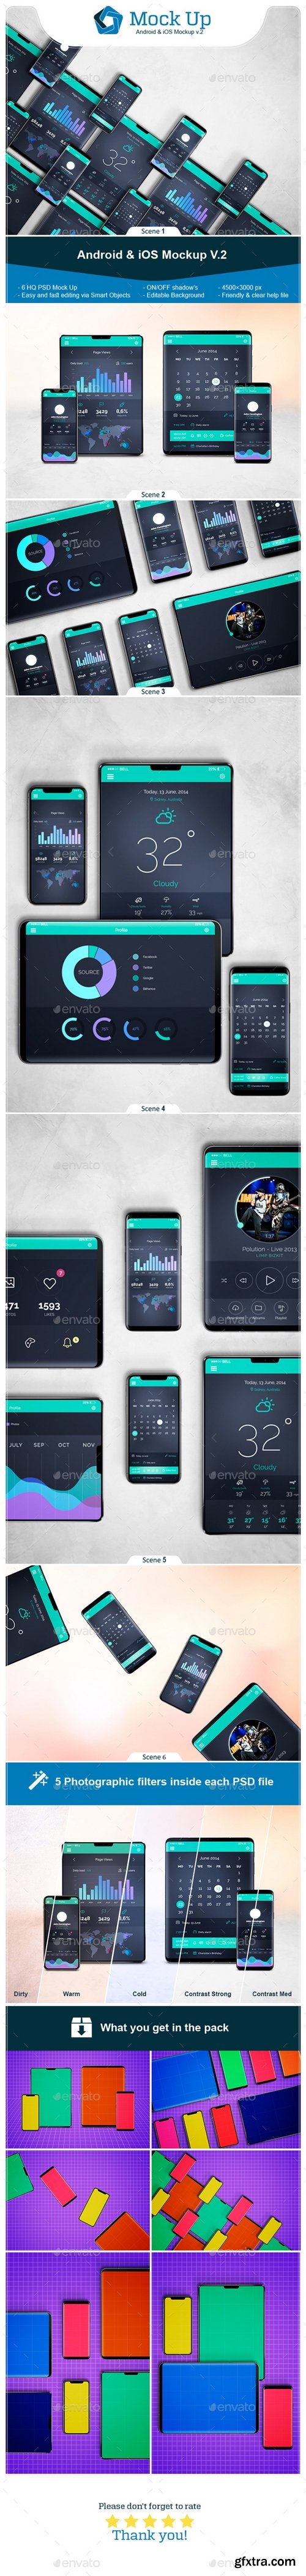 Graphicriver - Android & iOS Mockup V.2 21616959